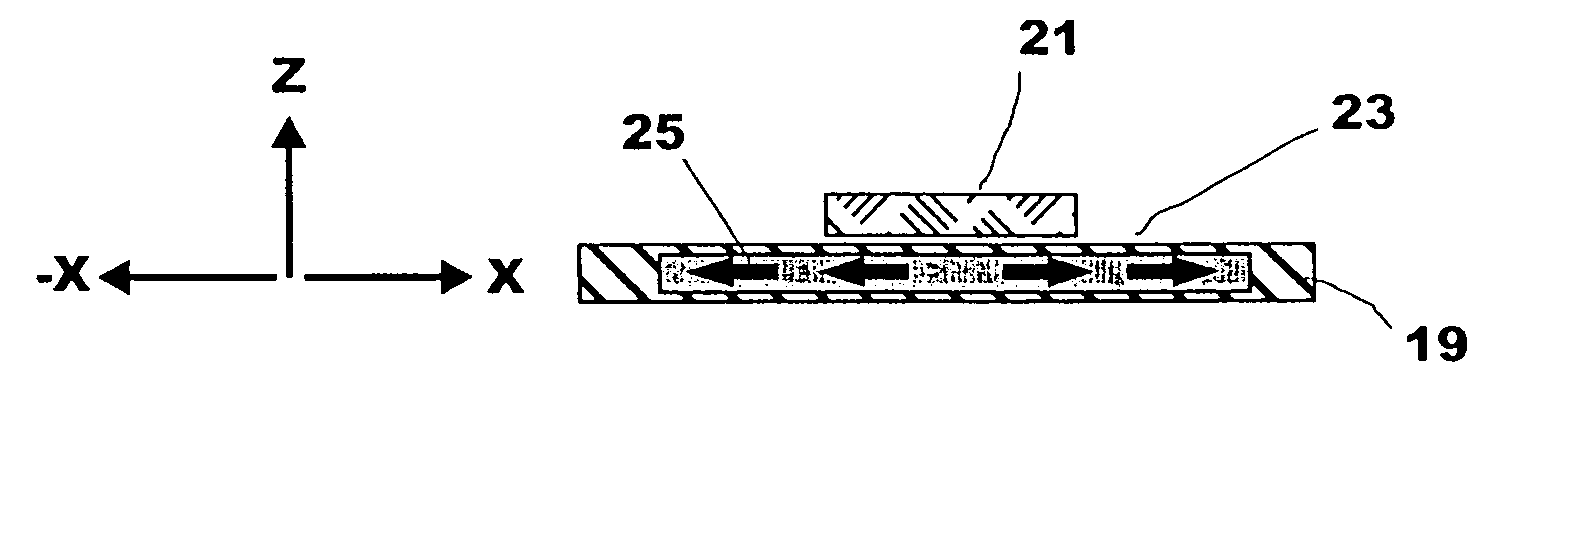 Thermal management system and computer arrangement